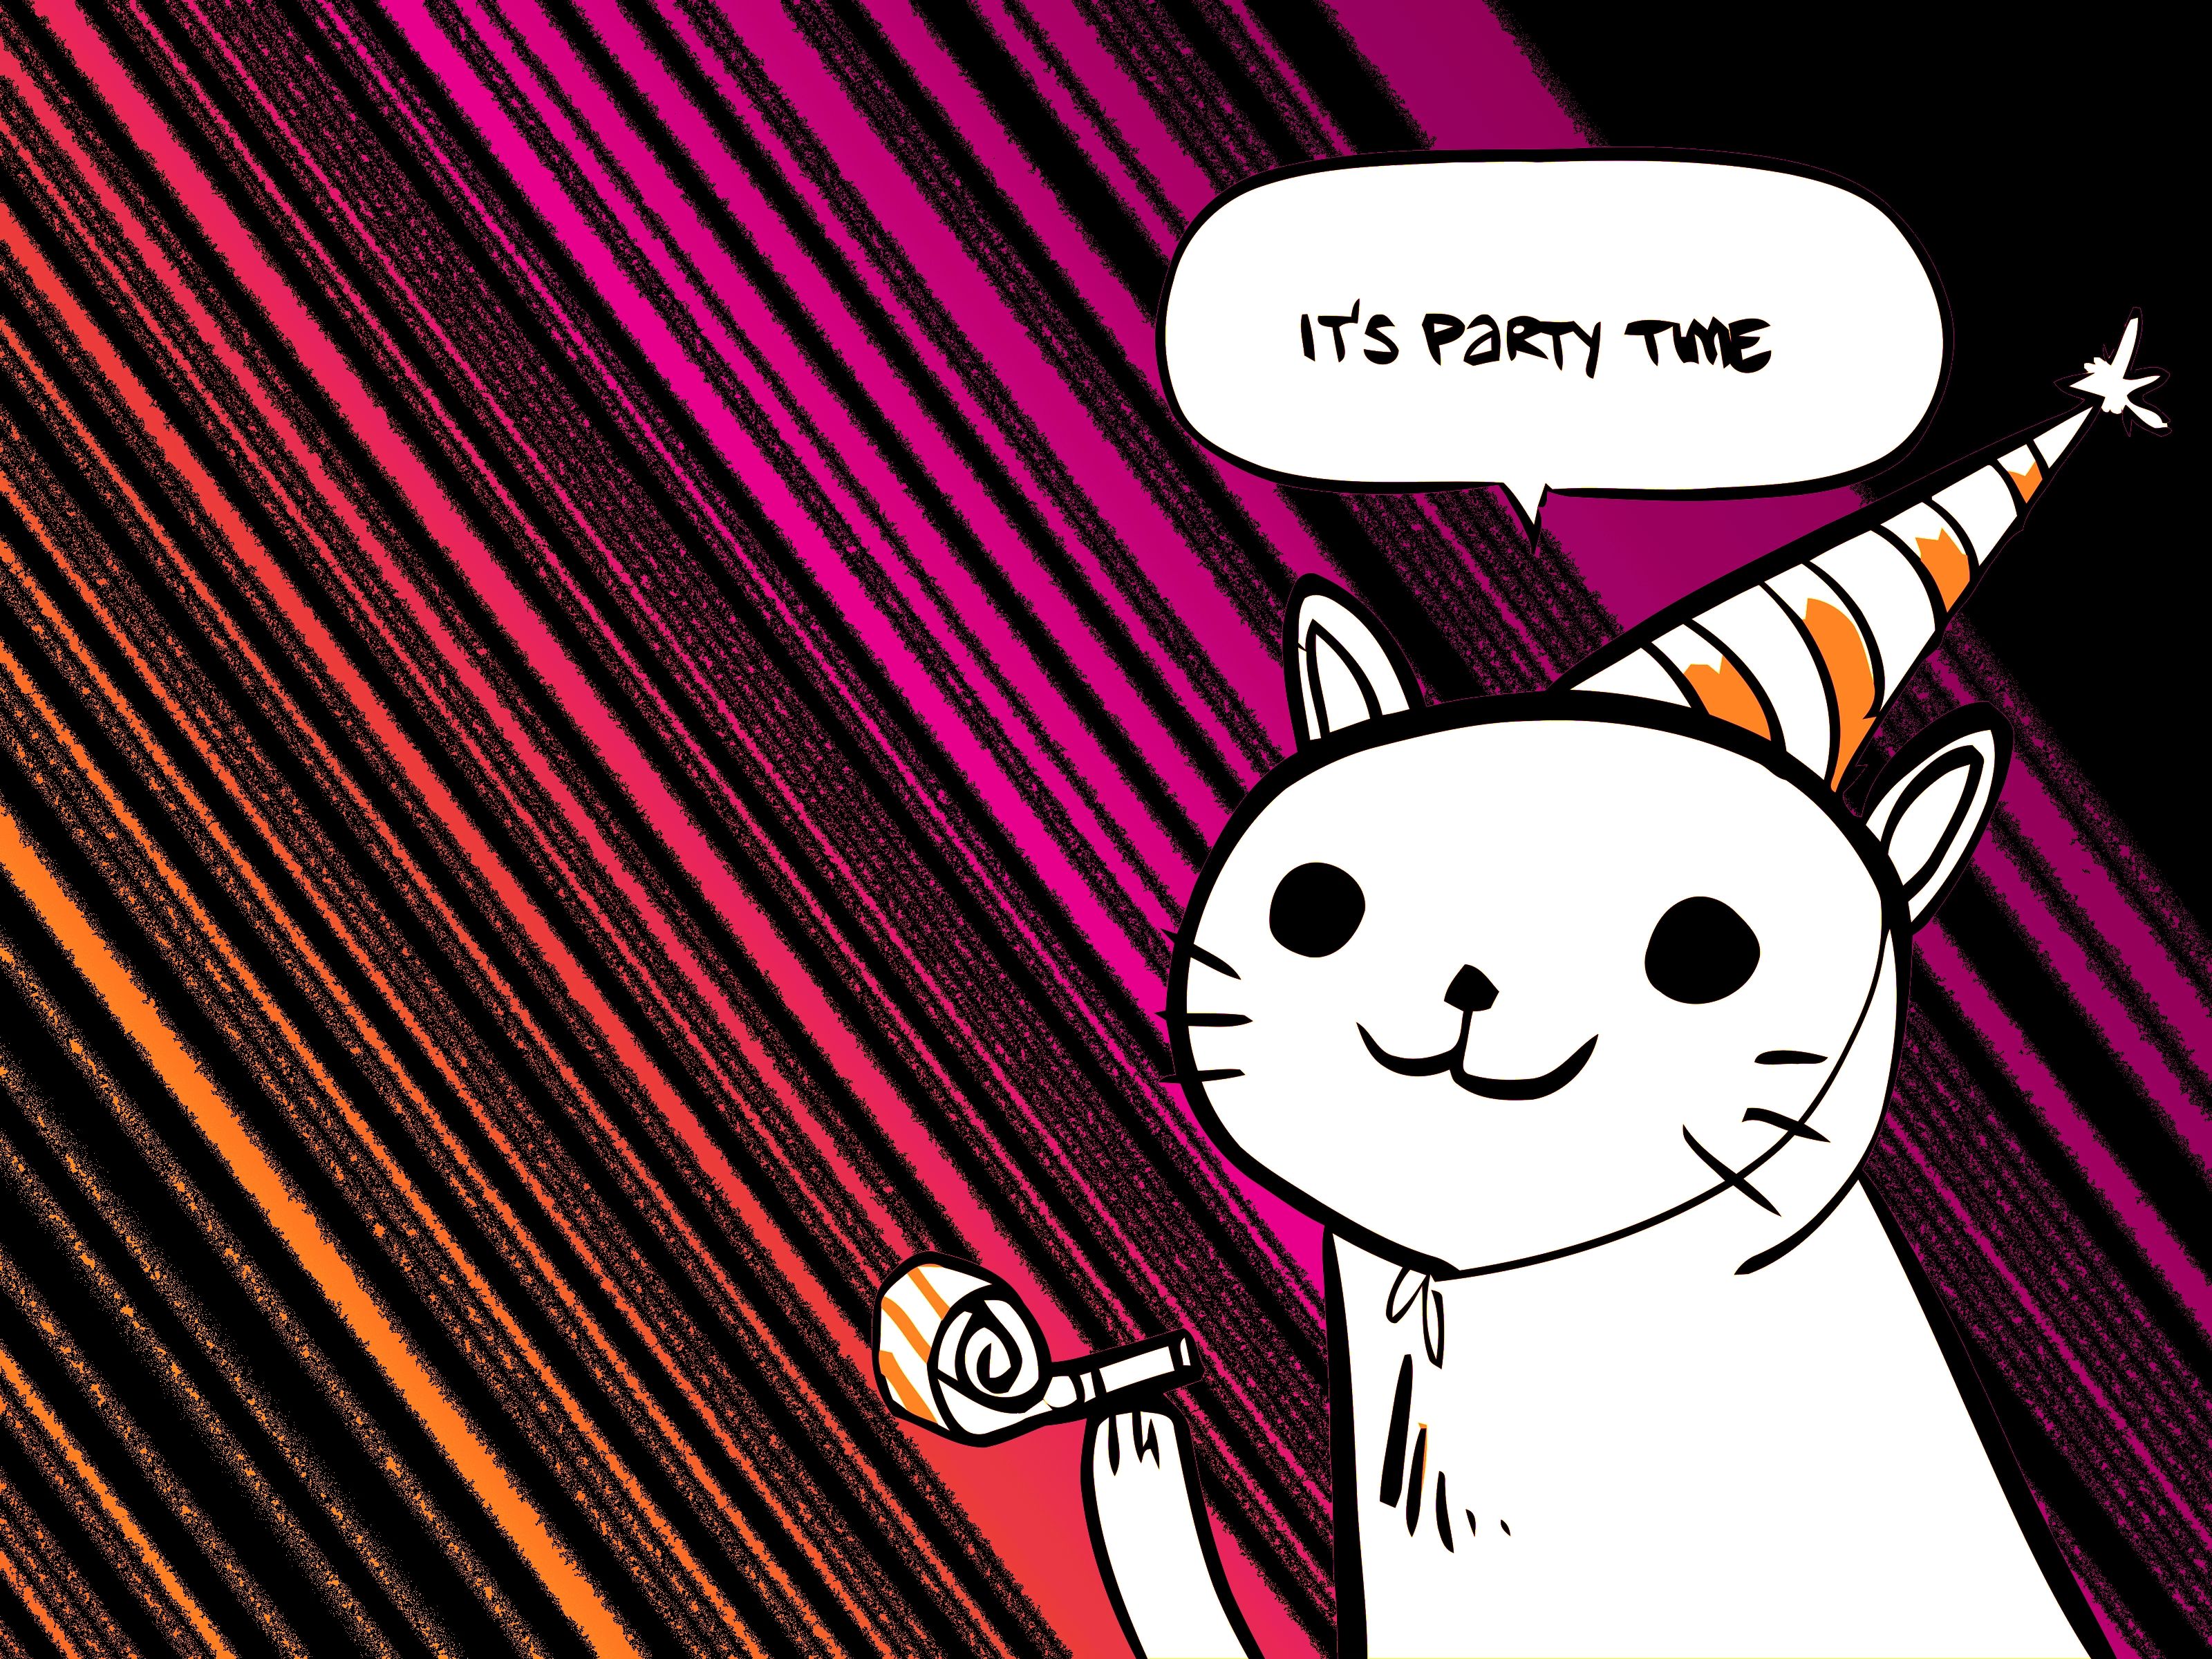 cats partying